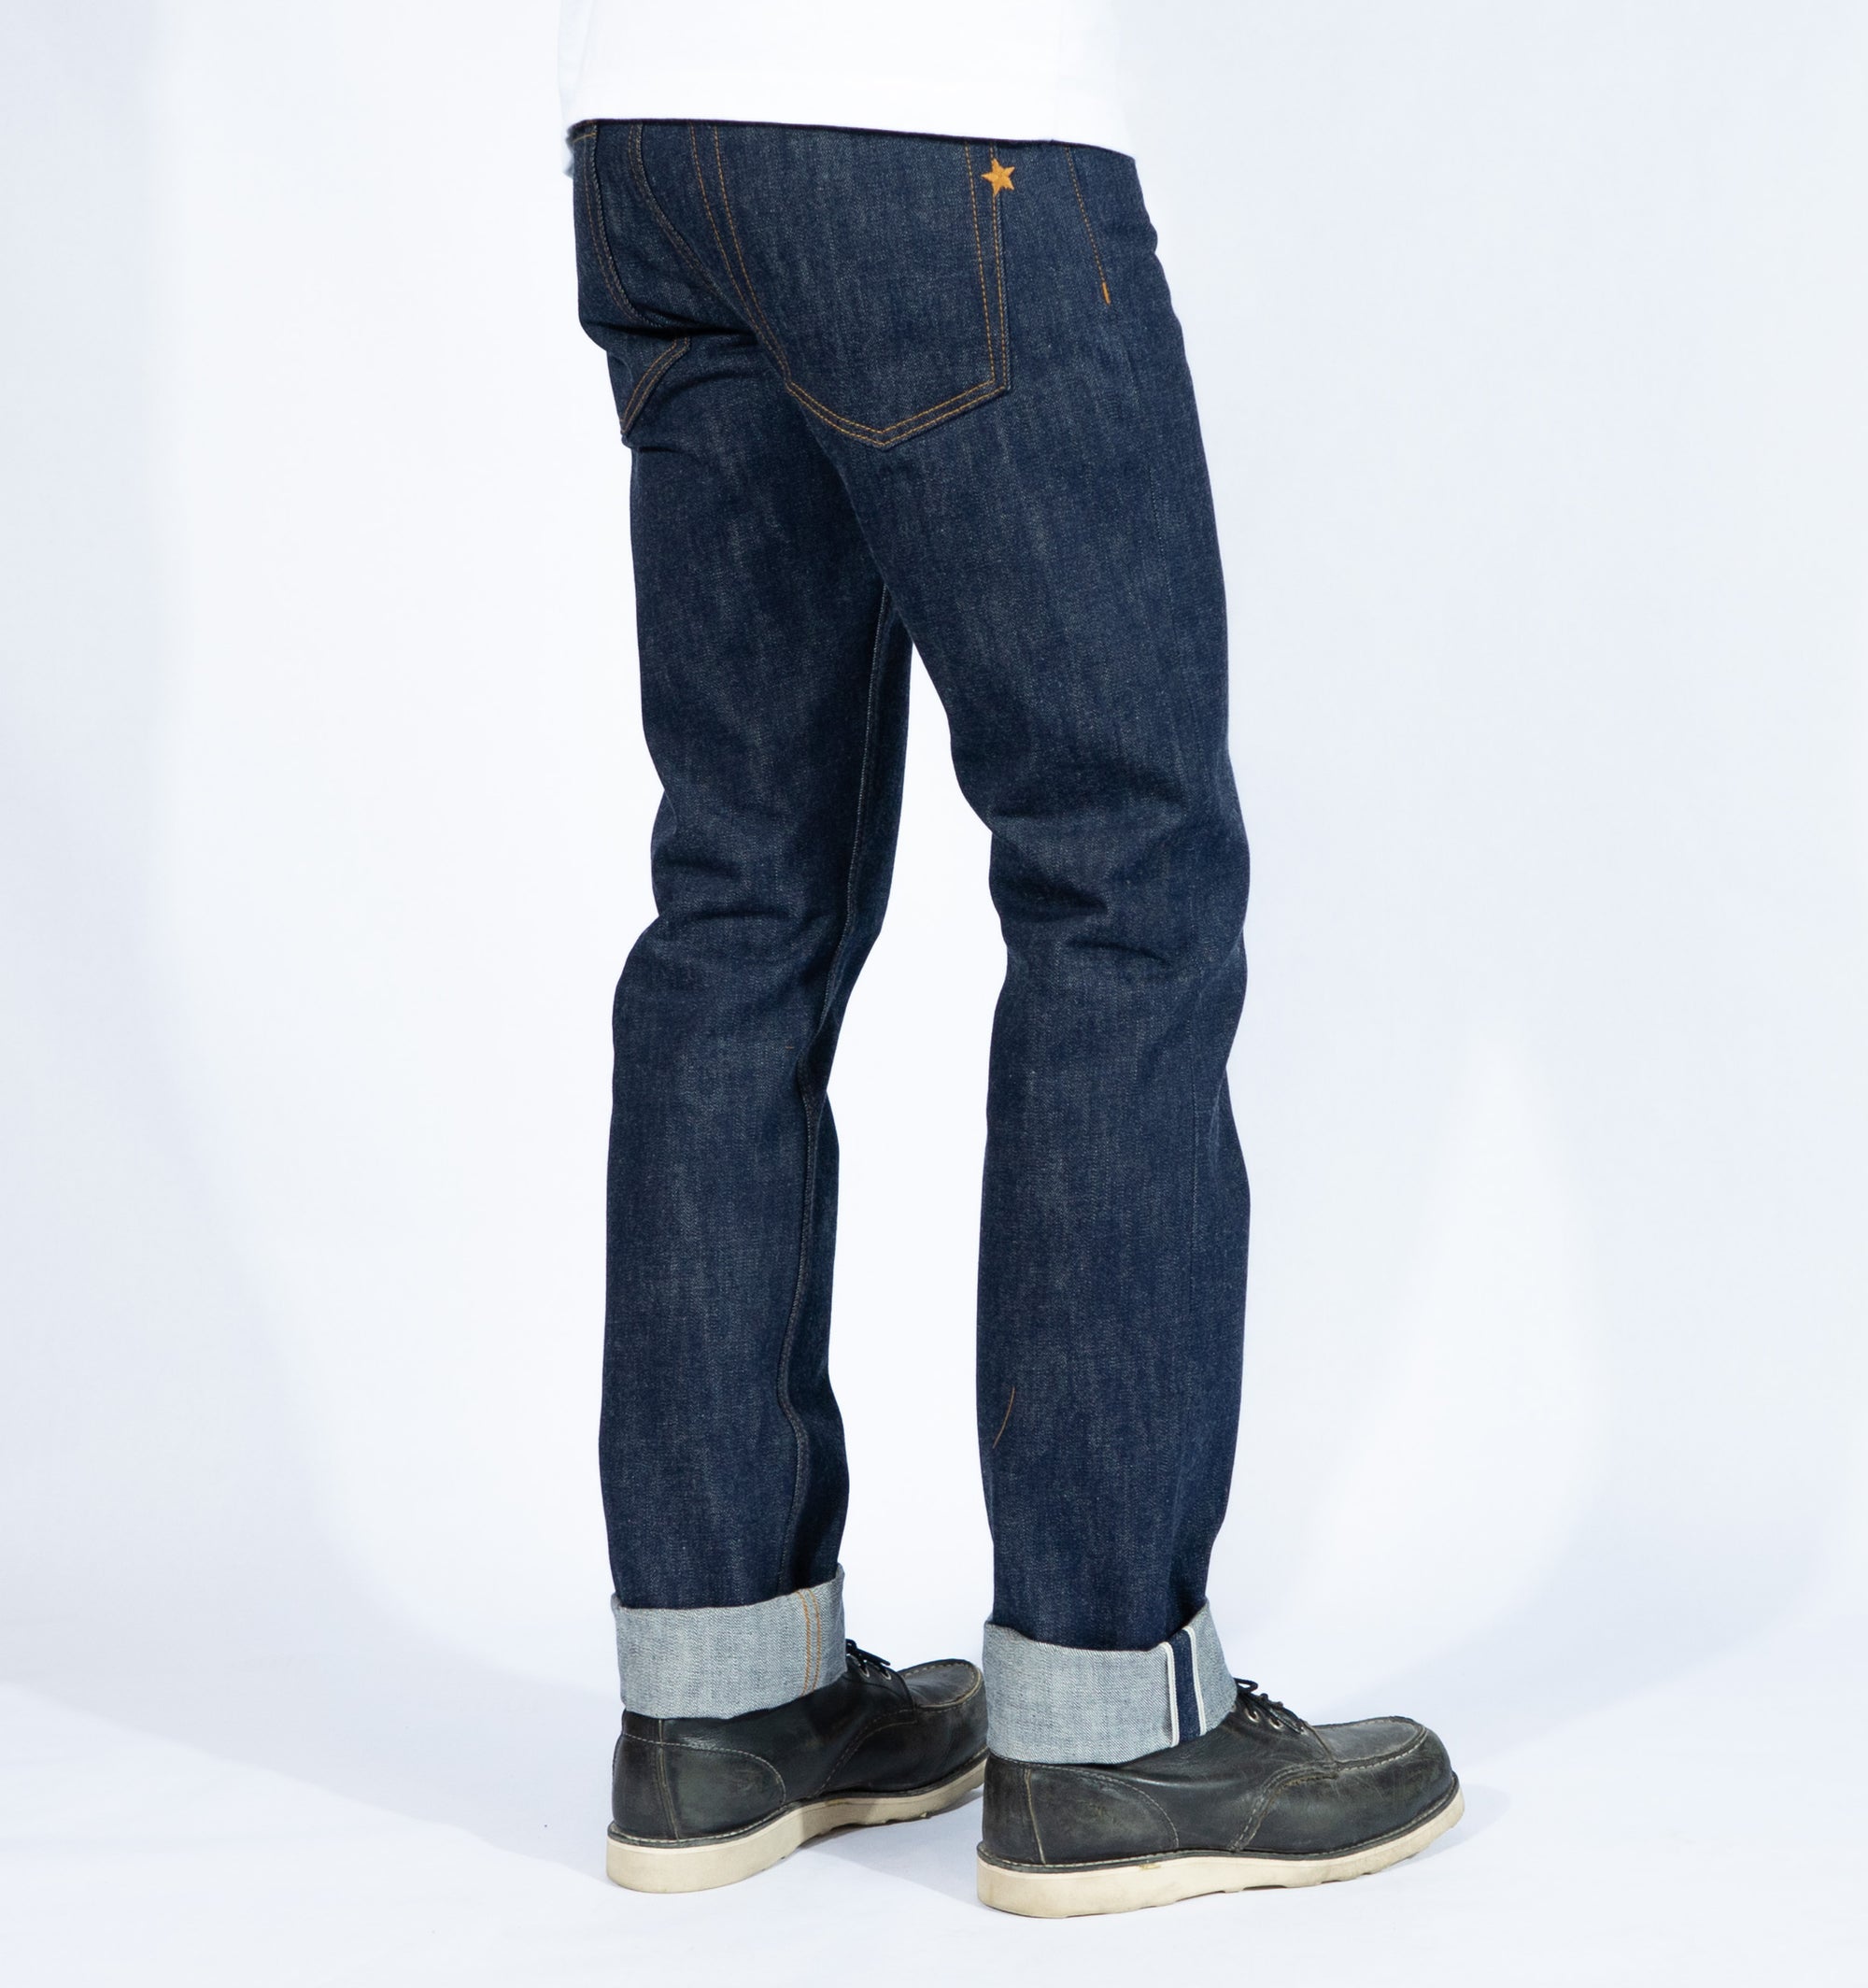 The True Straight 15oz Heavyweight Selvage - Brave Star Selvage